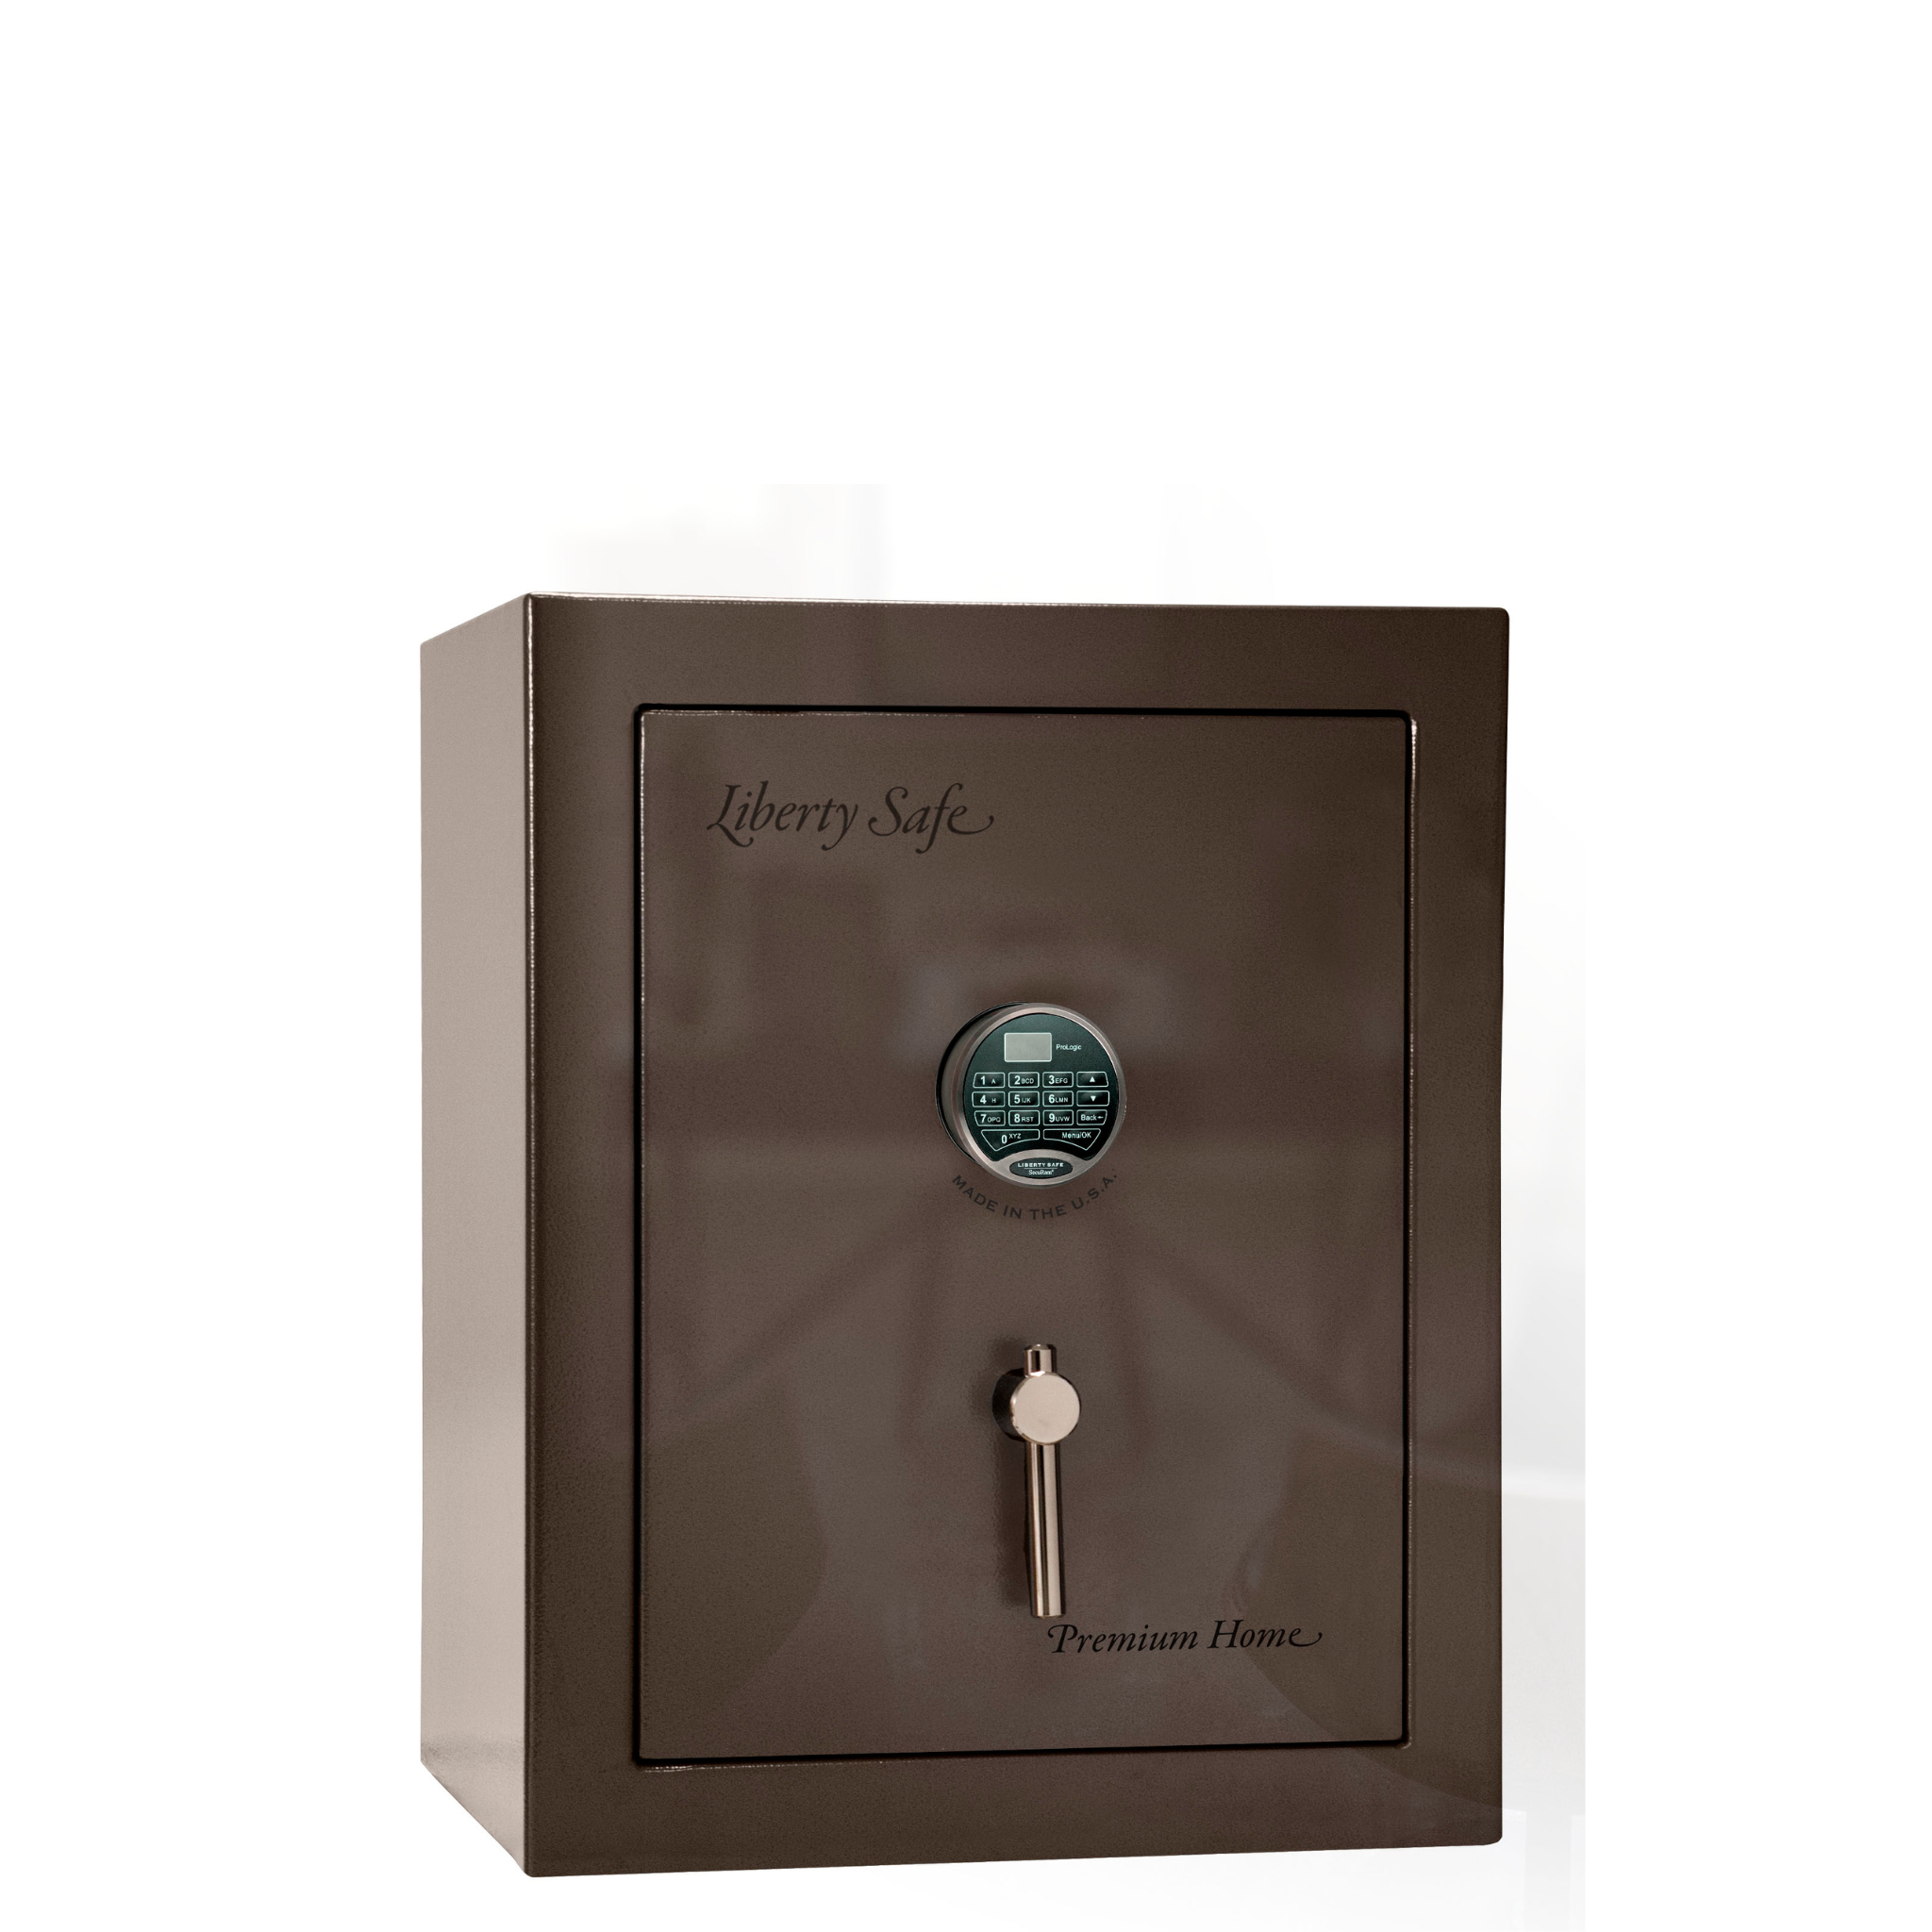 Premium Home Series | Level 7 Security | 2 Hour Fire Protection | 08 | Dimensions: 29.75"(H) x 24.5"(W) x 19"(D) | Bronze Gloss - Closed Door